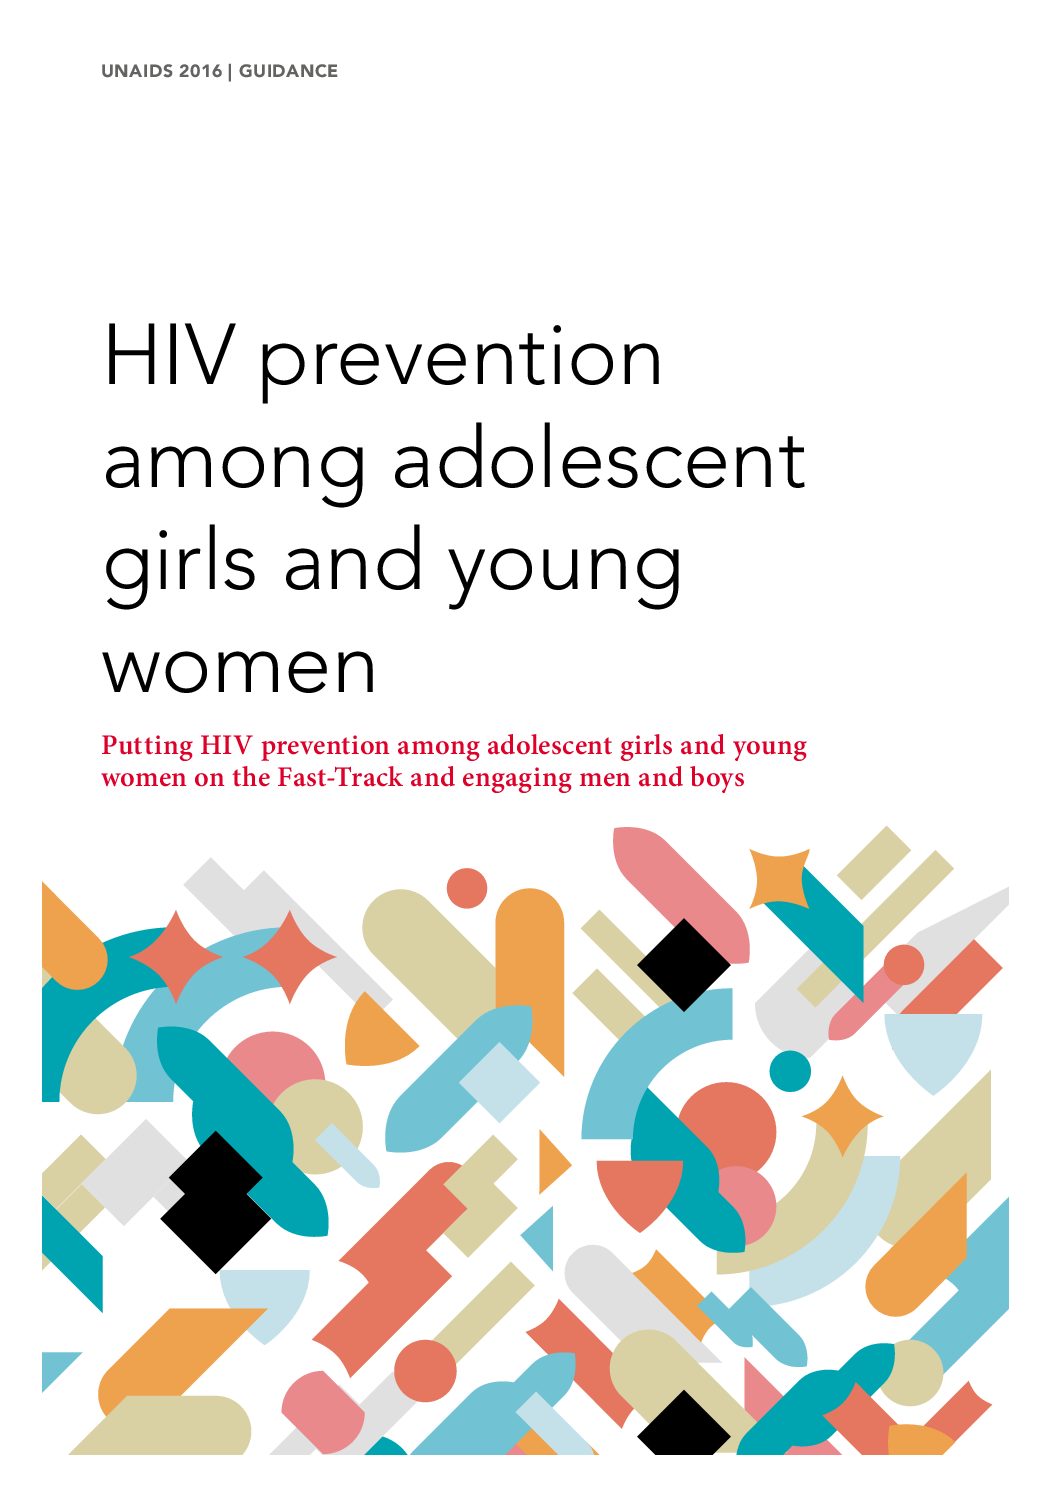 UNAIDS 2016 | GUIDANCE HIV prevention among adolescent girls and young women